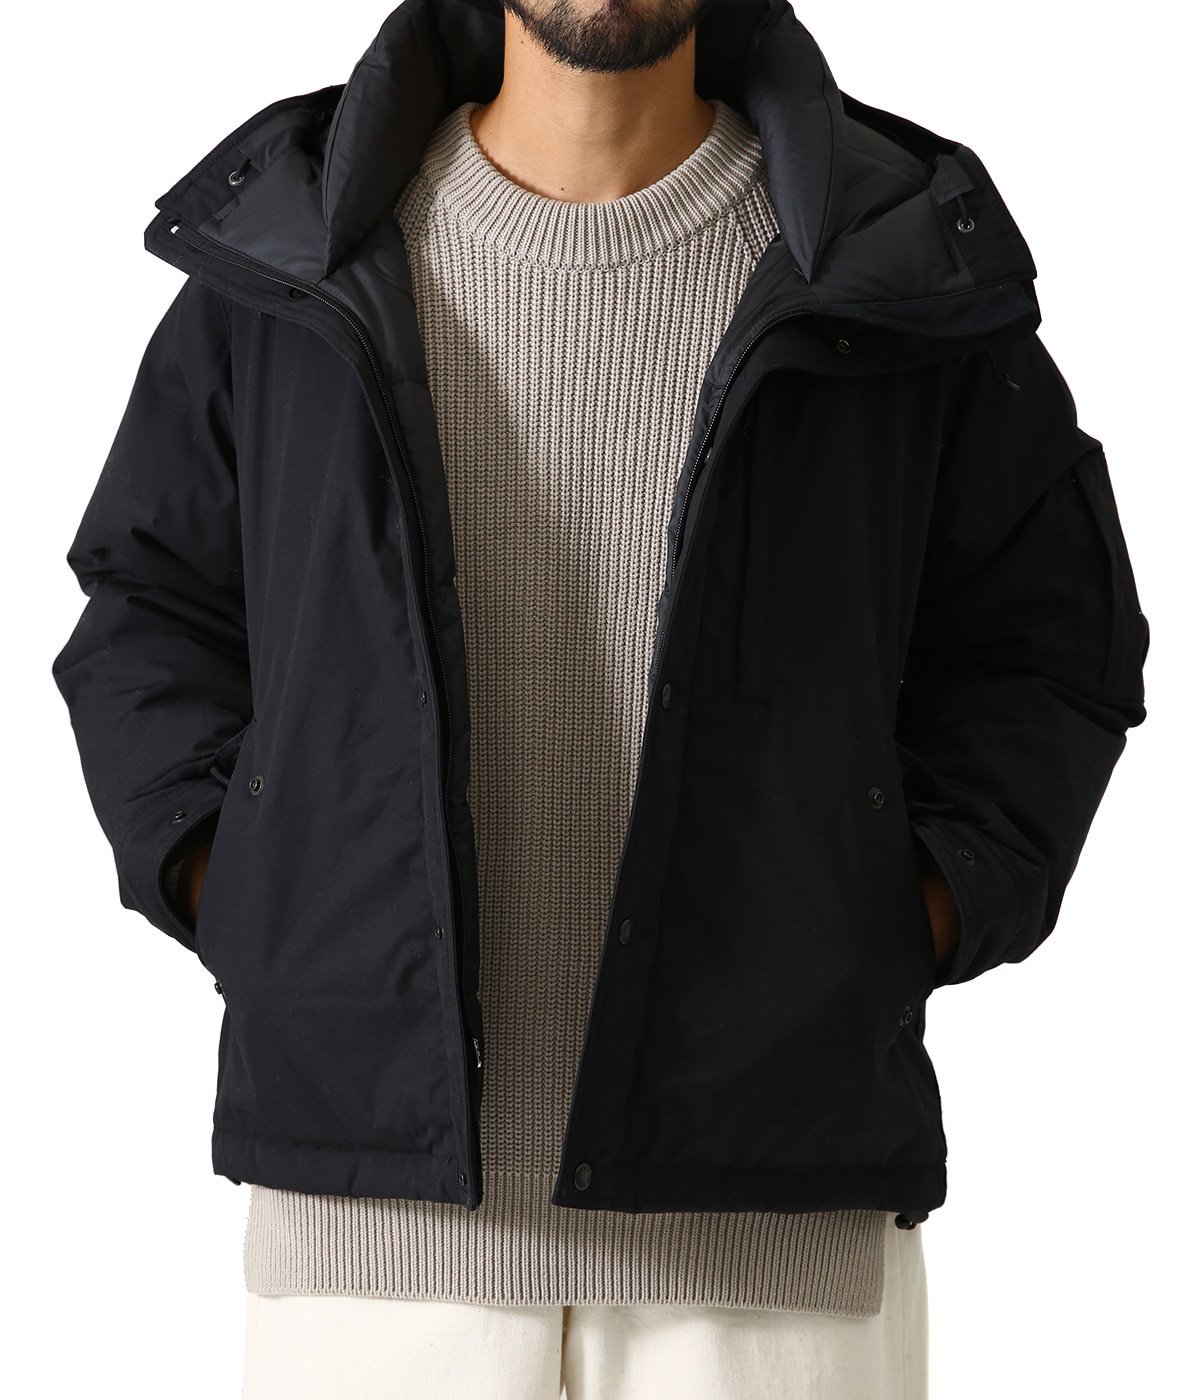 65 35 Mountain Short Down Parka S ブラック 通常商品 通販 Arknets アークネッツ